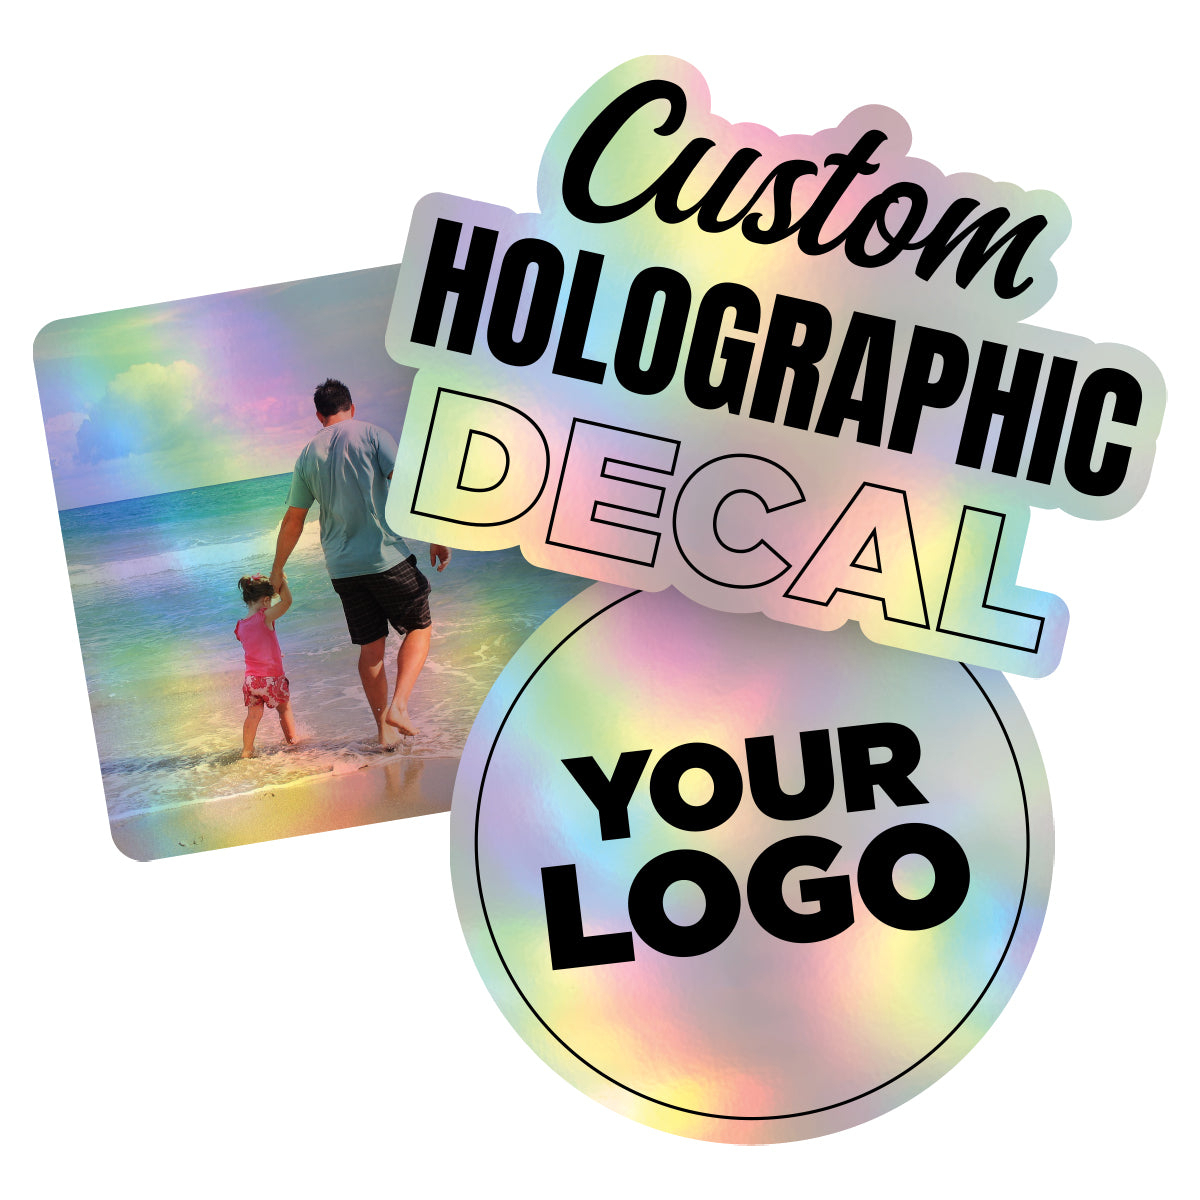 Personalized Holographic Vinyl Sticker Decal Custom Made Any Logo, Image, Text, Or Name Die Cut To Shape - 25 Pack, 2 Inch, Square